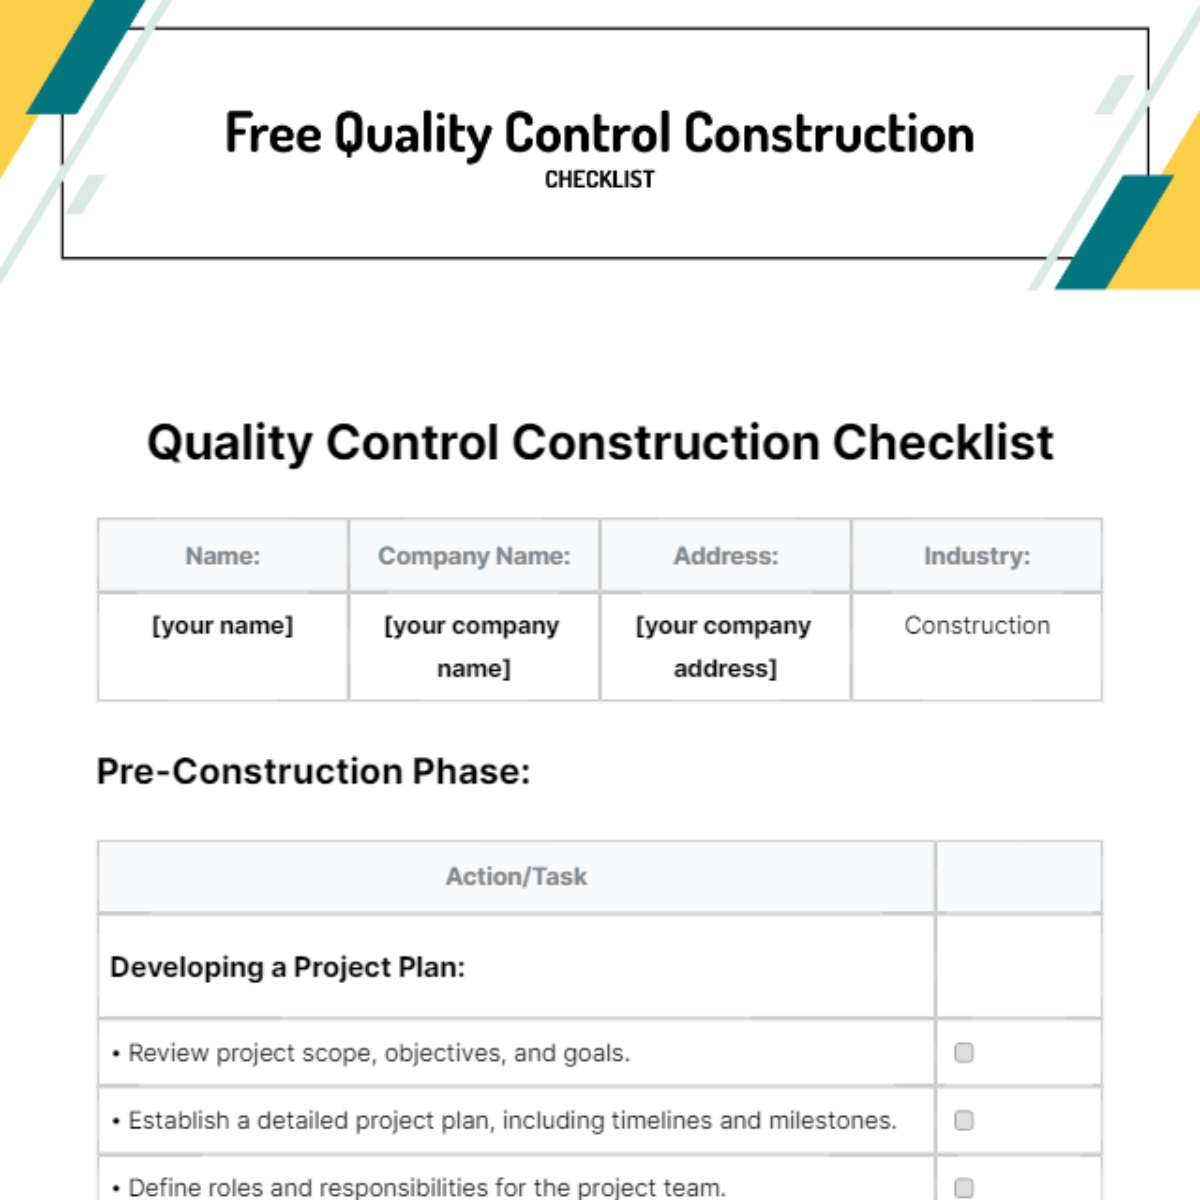 Quality Control Construction Checklist Template